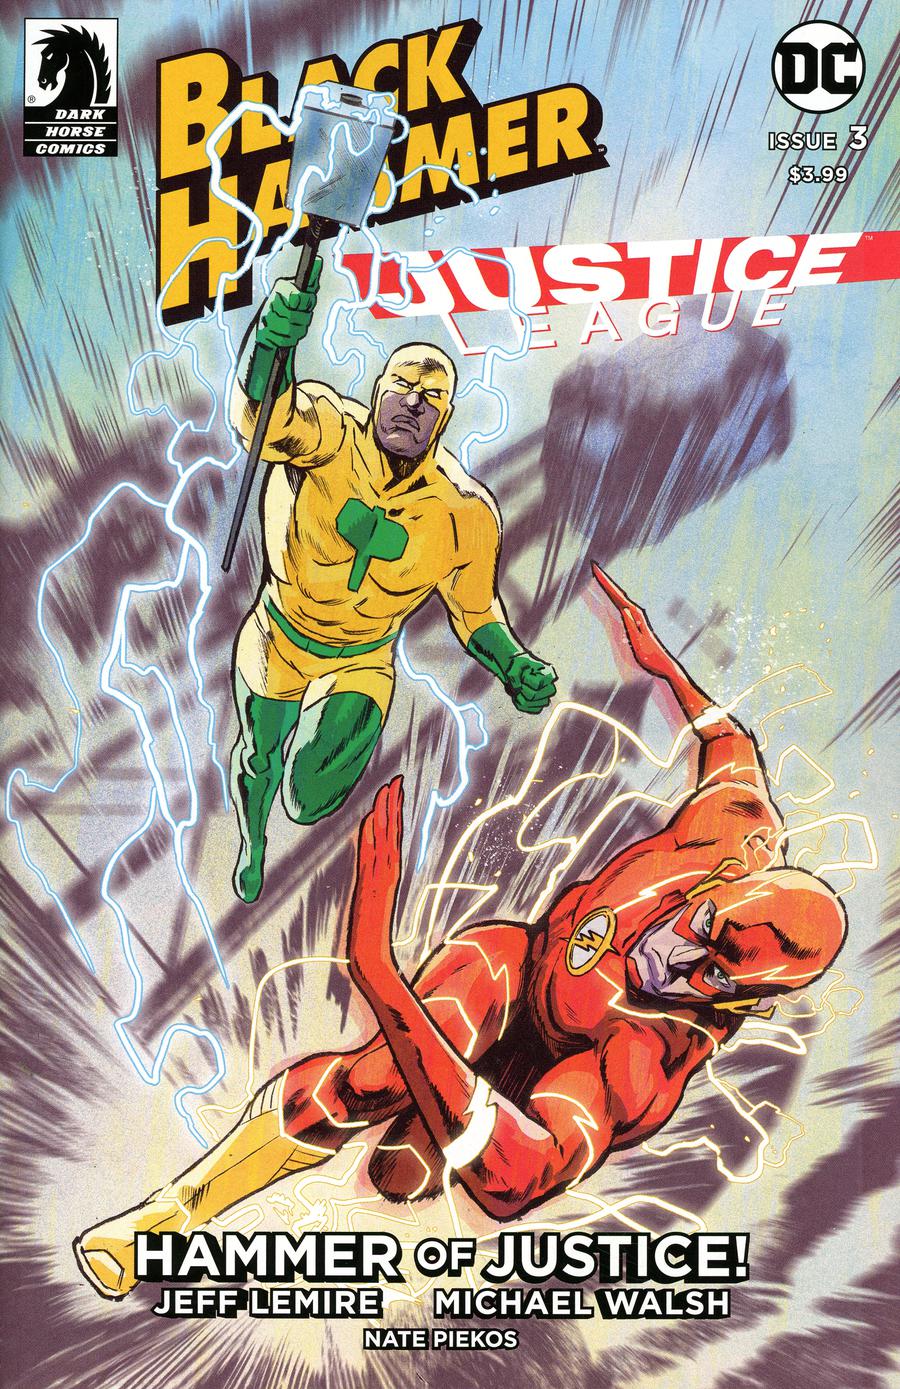 Black Hammer Justice League Hammer Of Justice #3 Cover A Regular Michael Walsh Cover